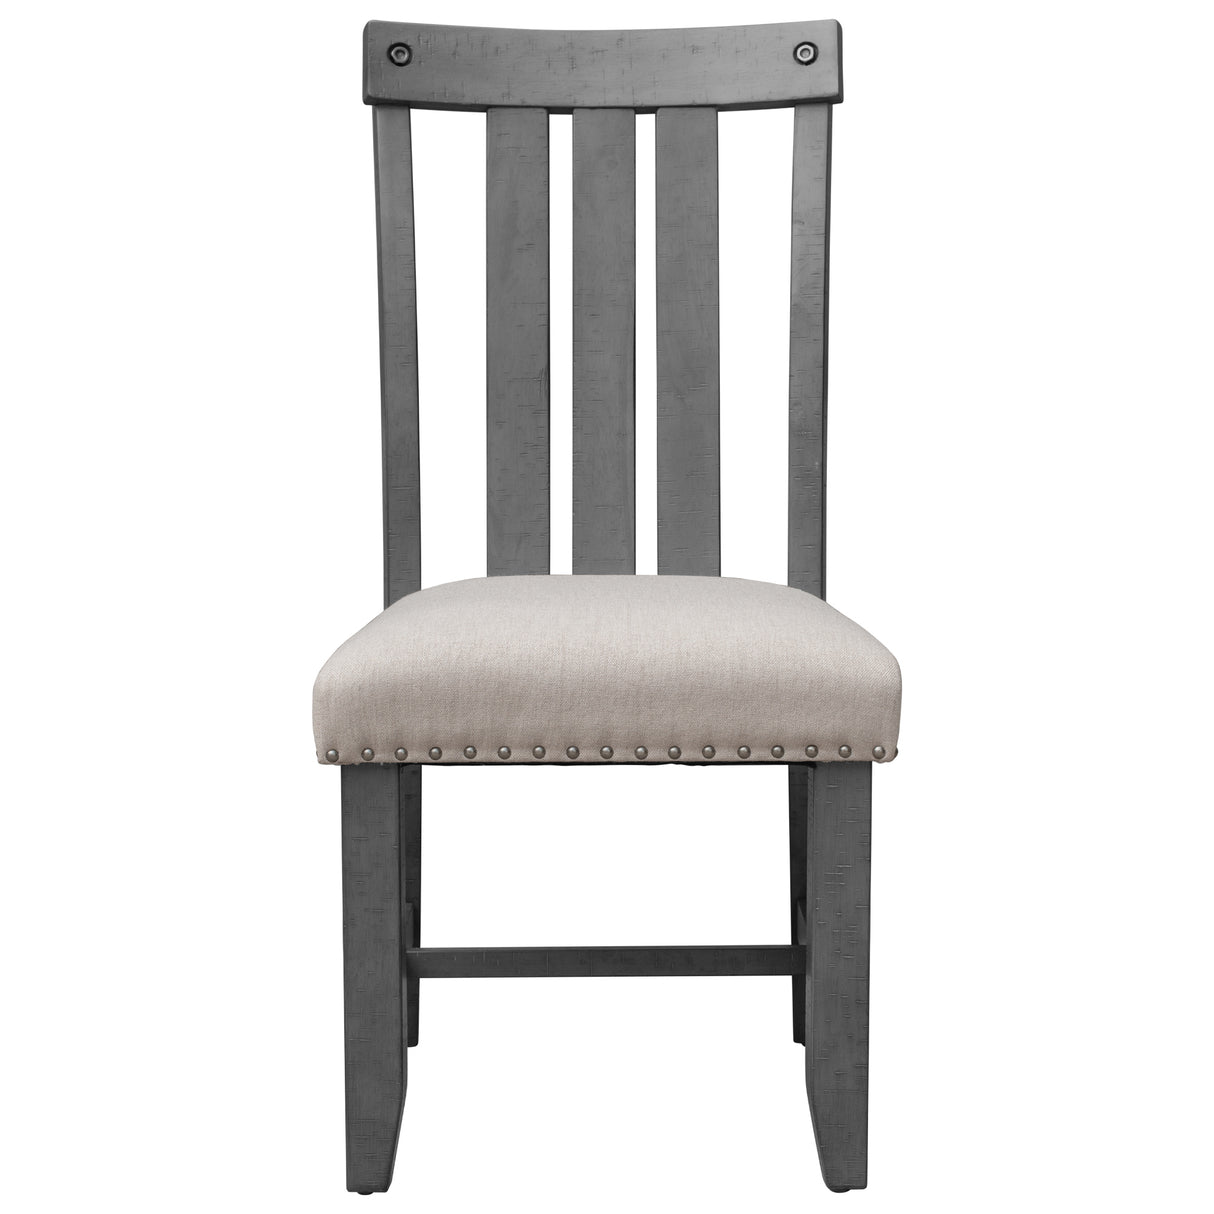 TREXM Set of 4 Fabric Upholstered Dining Chairs with Sliver Nails and Solid Wood Legs (Gray) - Home Elegance USA